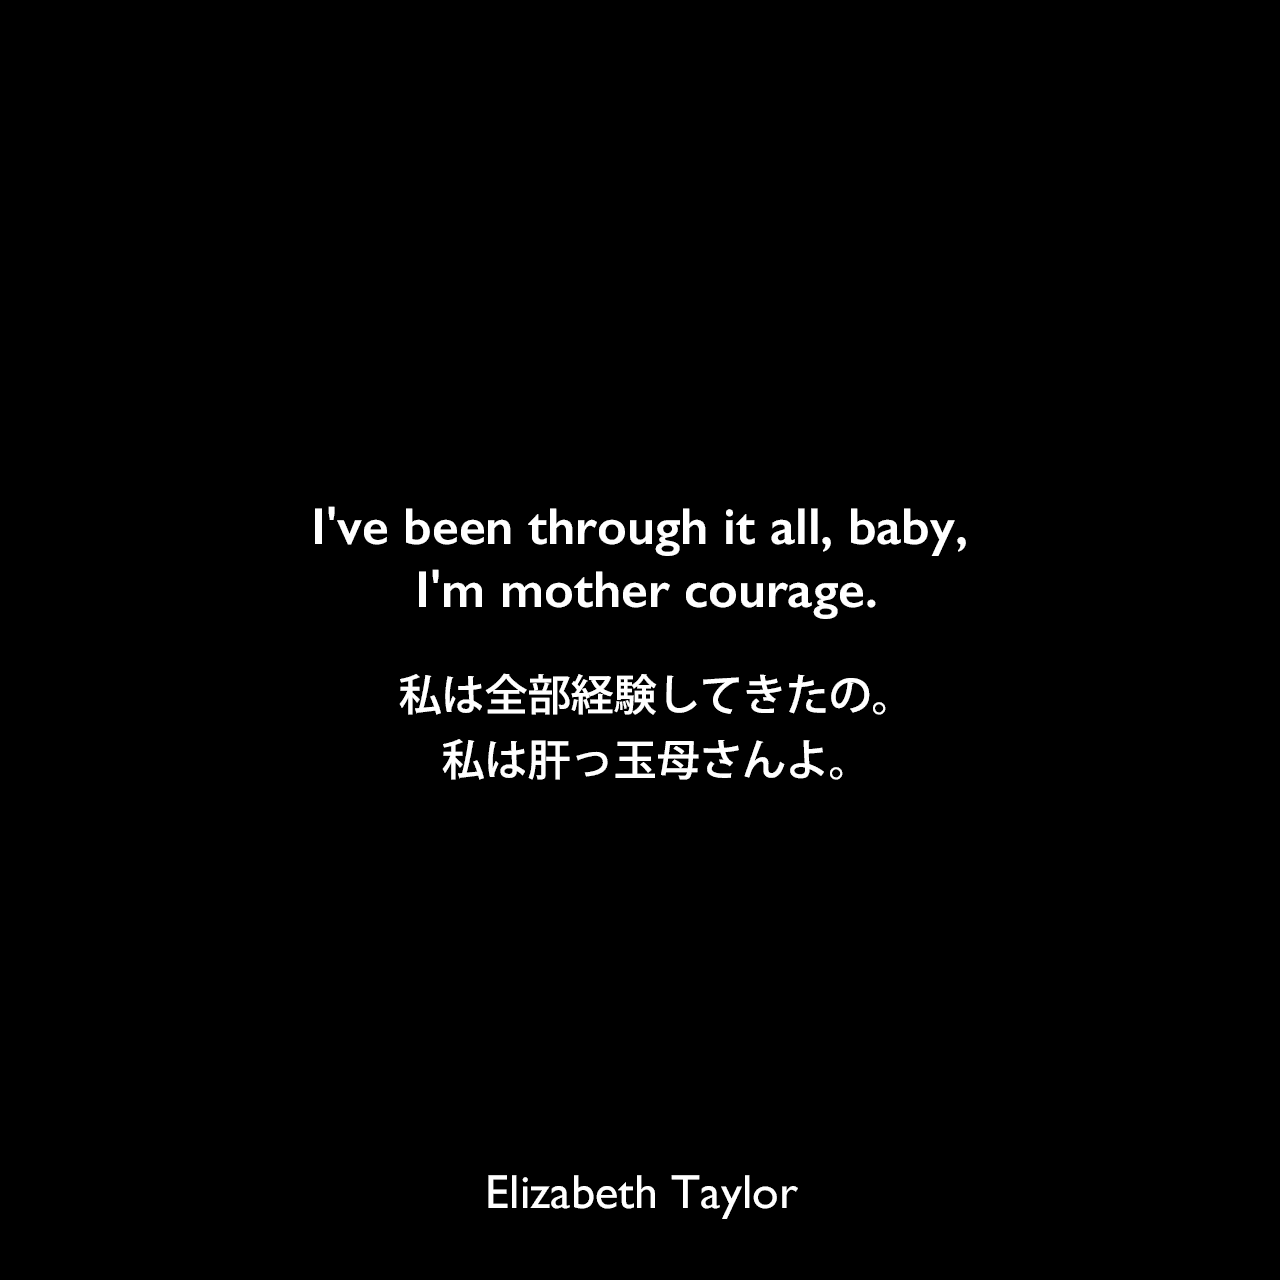 I've been through it all, baby, I'm mother courage.私は全部経験してきたの。私は肝っ玉母さんよ。Elizabeth Taylor